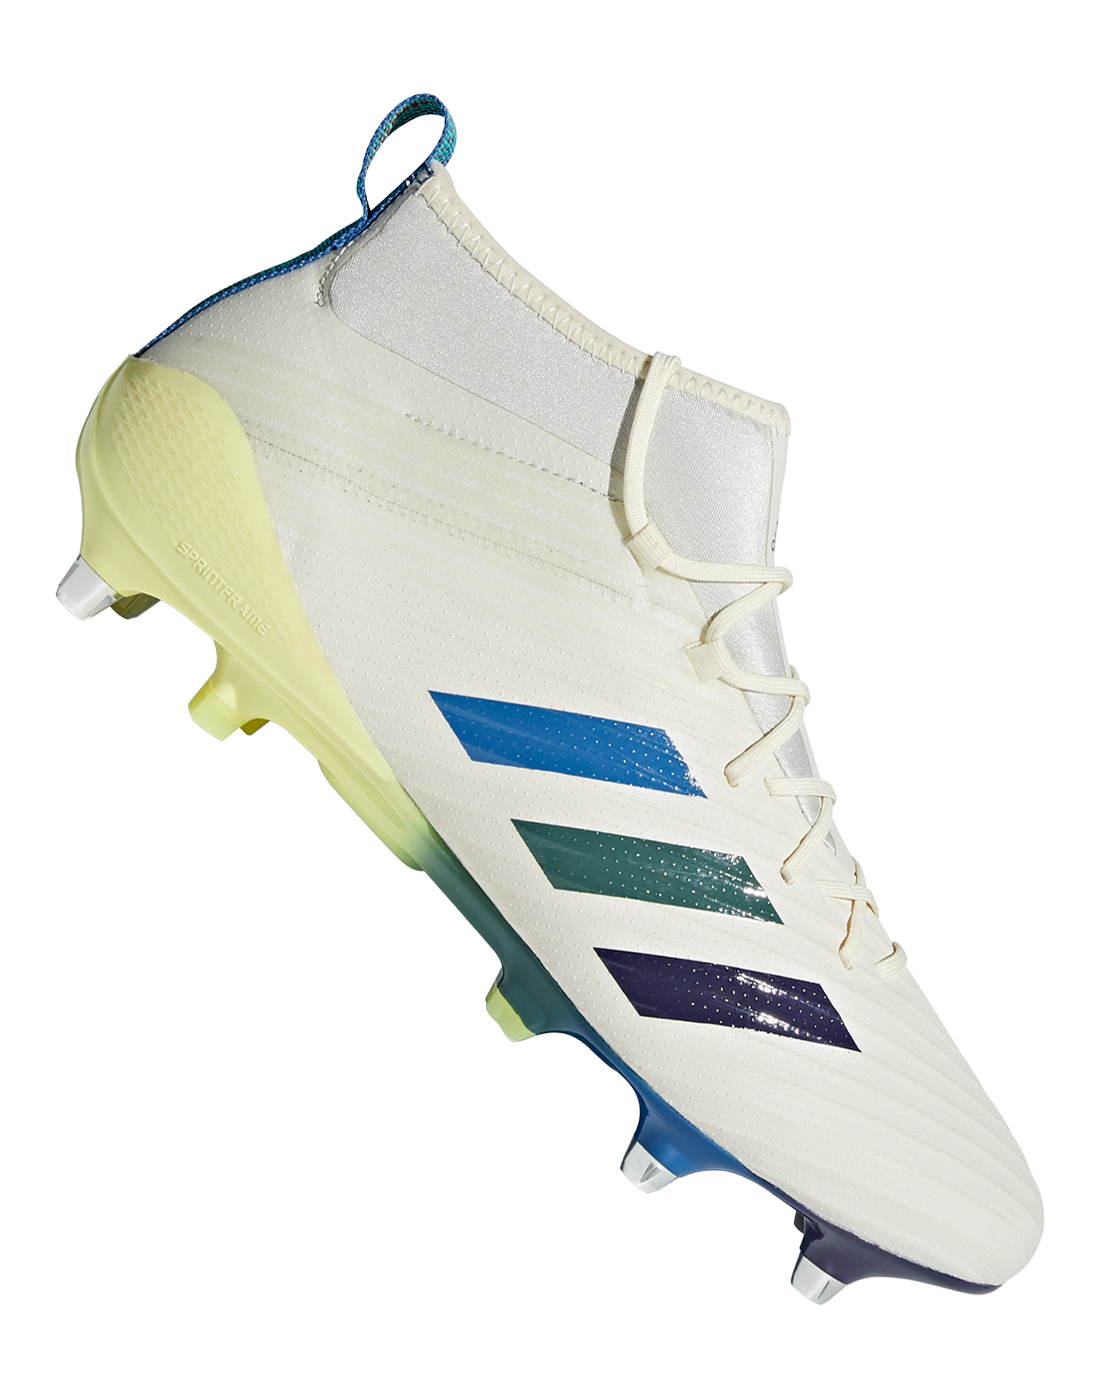 Adidas Predator Flare Rugby Boots Life Style Sports